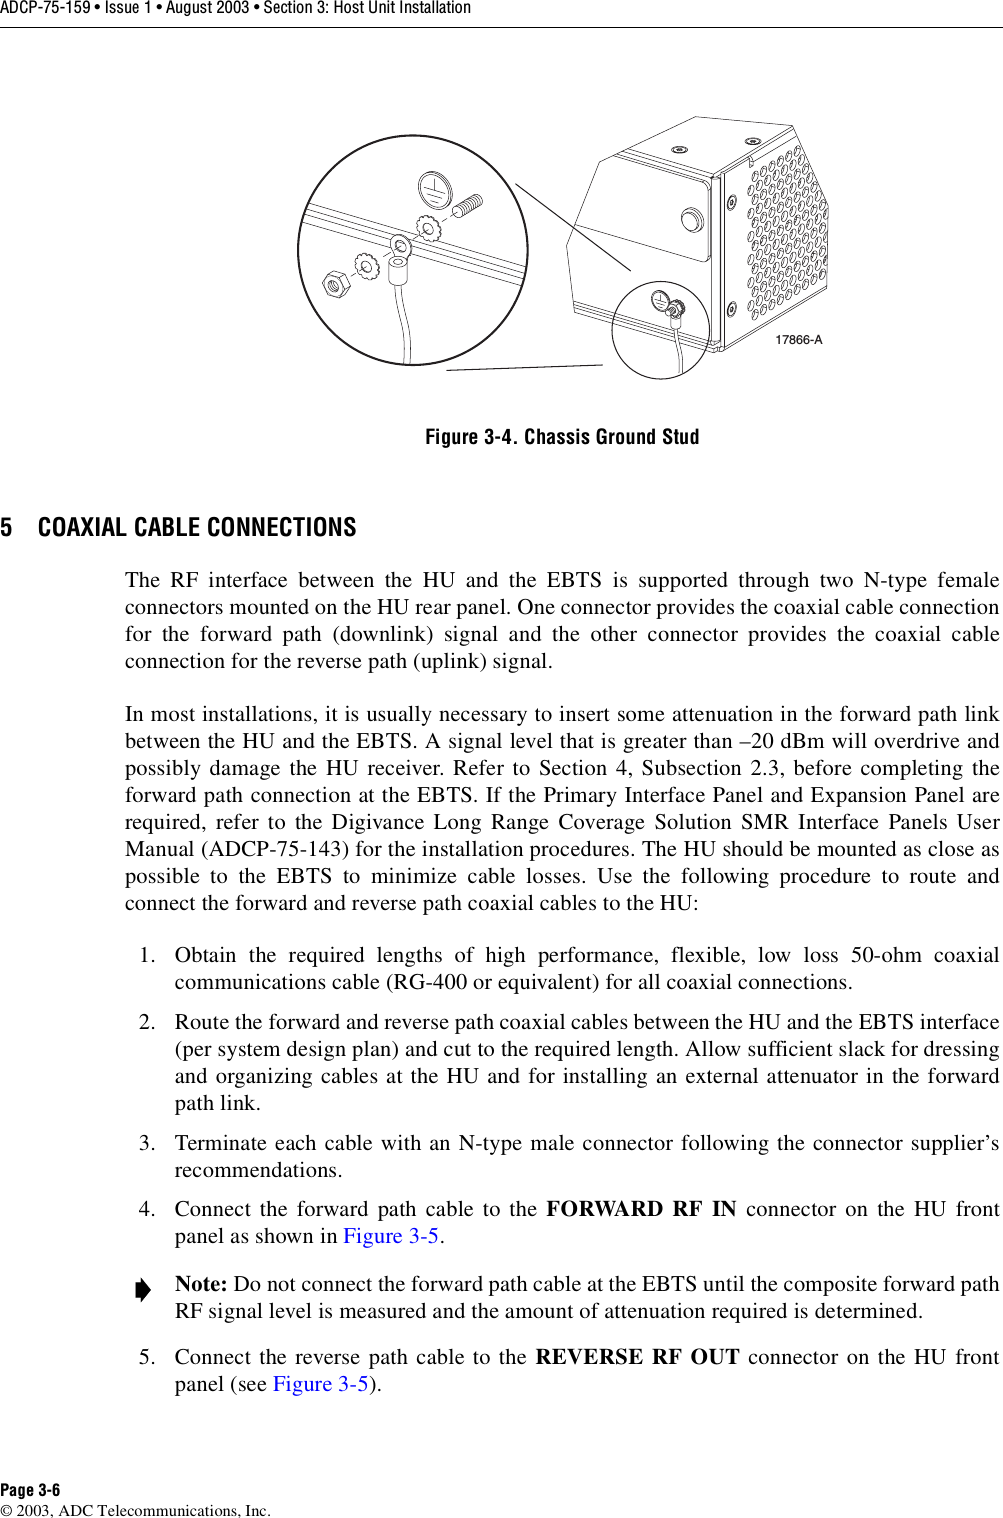 ADCP-75-159 • Issue 1 • August 2003 • Section 3: Host Unit InstallationPage 3-6© 2003, ADC Telecommunications, Inc.Figure 3-4. Chassis Ground Stud5 COAXIAL CABLE CONNECTIONSThe RF interface between the HU and the EBTS is supported through two N-type femaleconnectors mounted on the HU rear panel. One connector provides the coaxial cable connectionfor the forward path (downlink) signal and the other connector provides the coaxial cableconnection for the reverse path (uplink) signal. In most installations, it is usually necessary to insert some attenuation in the forward path linkbetween the HU and the EBTS. A signal level that is greater than –20 dBm will overdrive andpossibly damage the HU receiver. Refer to Section 4, Subsection 2.3, before completing theforward path connection at the EBTS. If the Primary Interface Panel and Expansion Panel arerequired, refer to the Digivance Long Range Coverage Solution SMR Interface Panels UserManual (ADCP-75-143) for the installation procedures. The HU should be mounted as close aspossible to the EBTS to minimize cable losses. Use the following procedure to route andconnect the forward and reverse path coaxial cables to the HU: 1. Obtain the required lengths of high performance, flexible, low loss 50-ohm coaxialcommunications cable (RG-400 or equivalent) for all coaxial connections. 2. Route the forward and reverse path coaxial cables between the HU and the EBTS interface(per system design plan) and cut to the required length. Allow sufficient slack for dressingand organizing cables at the HU and for installing an external attenuator in the forwardpath link. 3. Terminate each cable with an N-type male connector following the connector supplier’srecommendations. 4. Connect the forward path cable to the FORWARD RF IN connector on the HU frontpanel as shown in Figure 3-5.5. Connect the reverse path cable to the REVERSE RF OUT connector on the HU frontpanel (see Figure 3-5). Note: Do not connect the forward path cable at the EBTS until the composite forward pathRF signal level is measured and the amount of attenuation required is determined. 17866-A